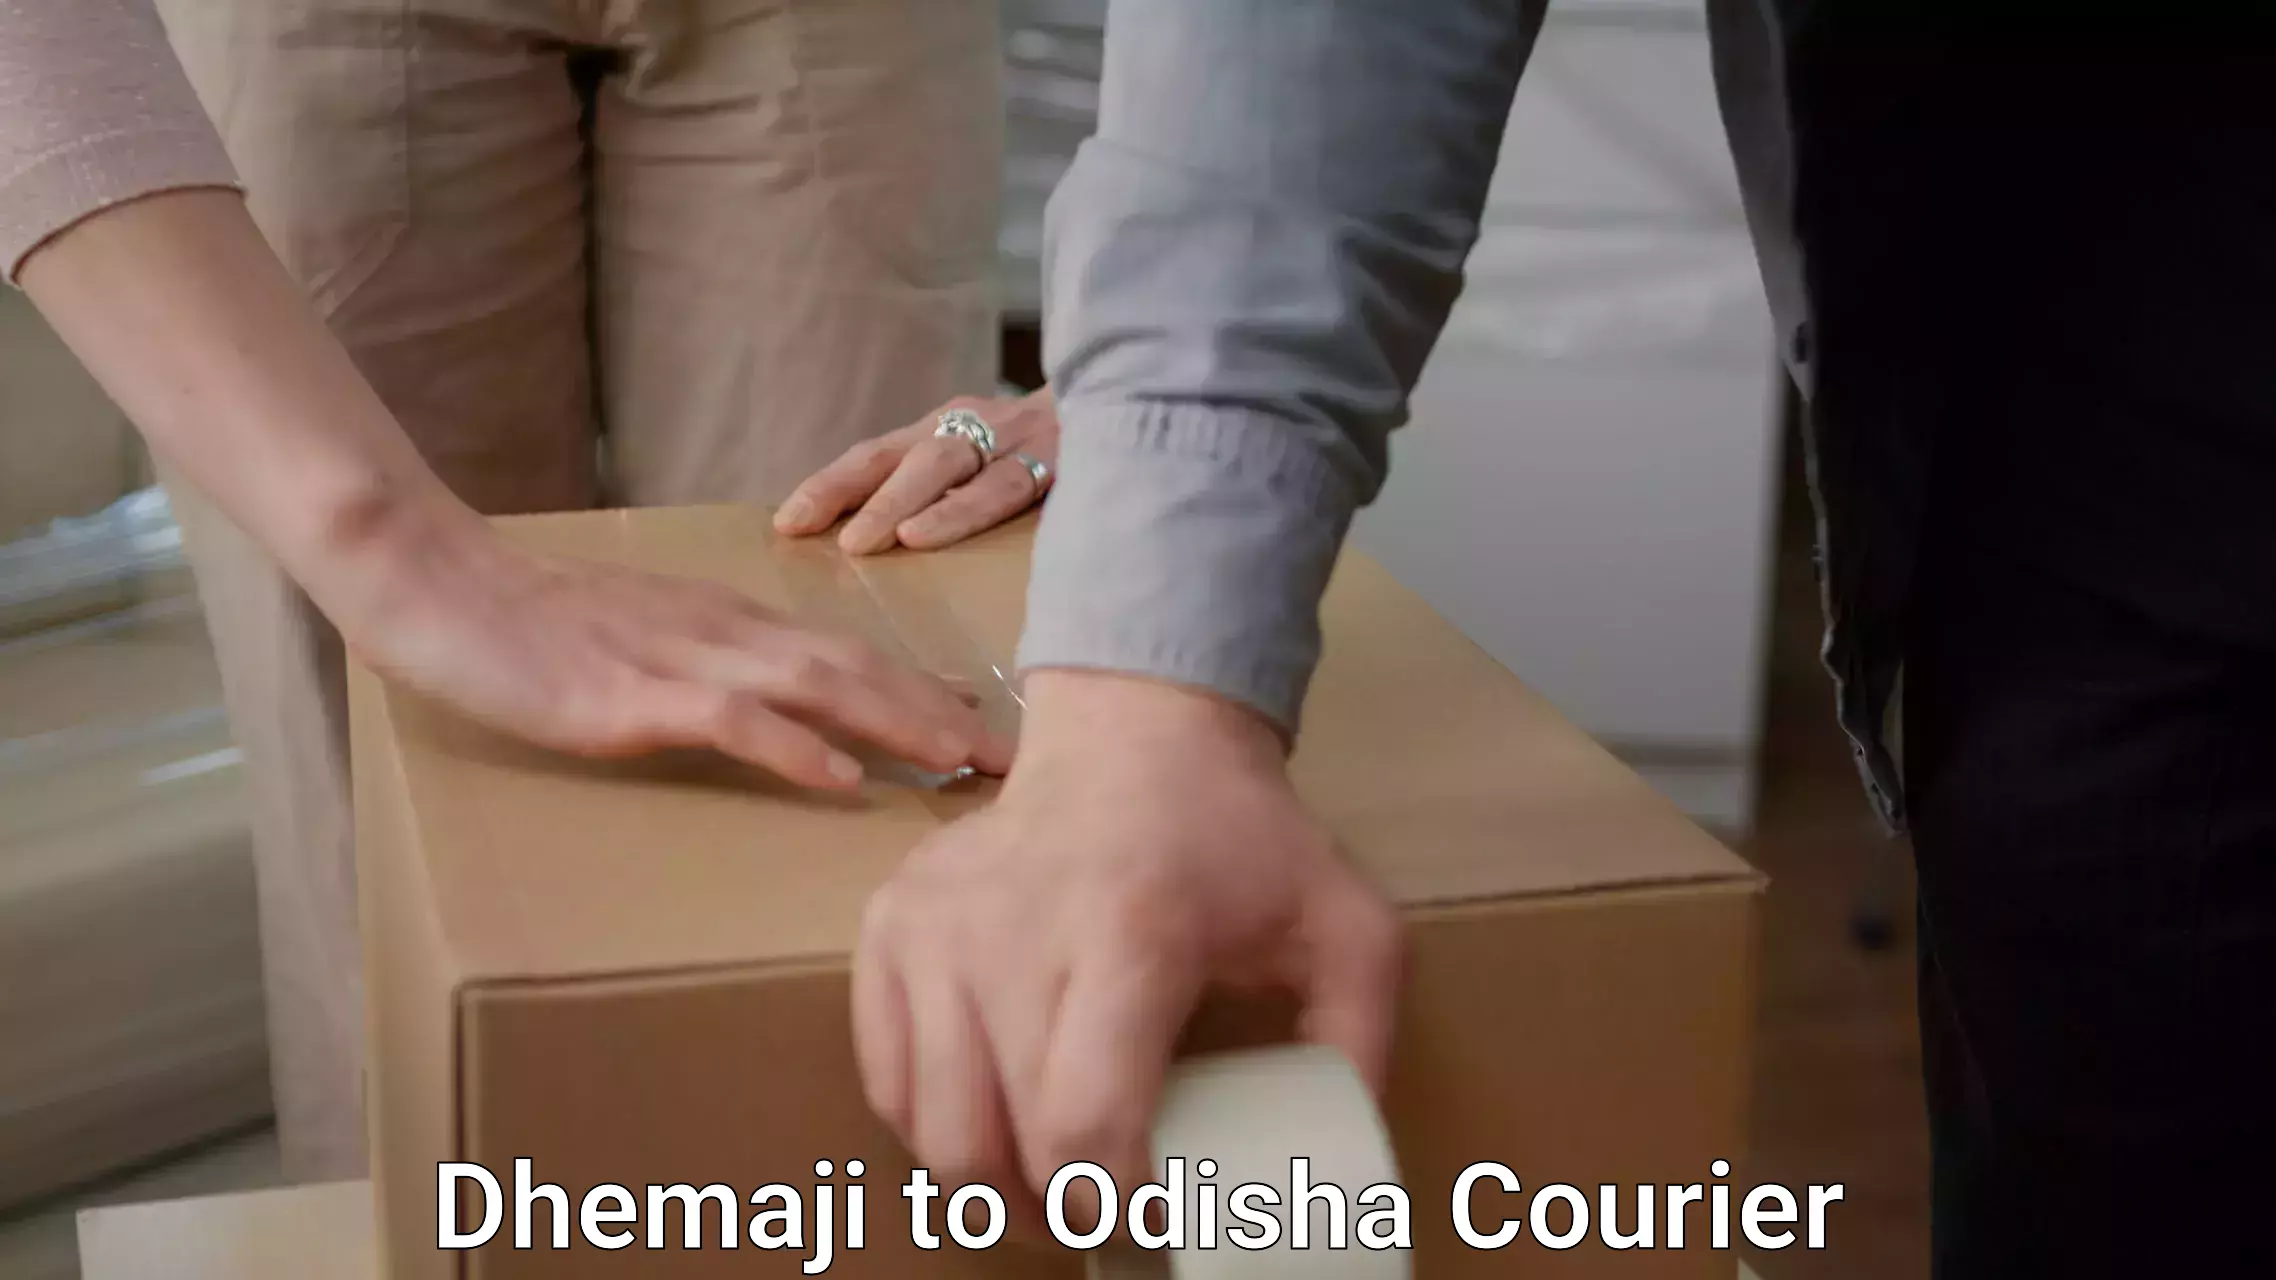 Furniture delivery service Dhemaji to Barkote